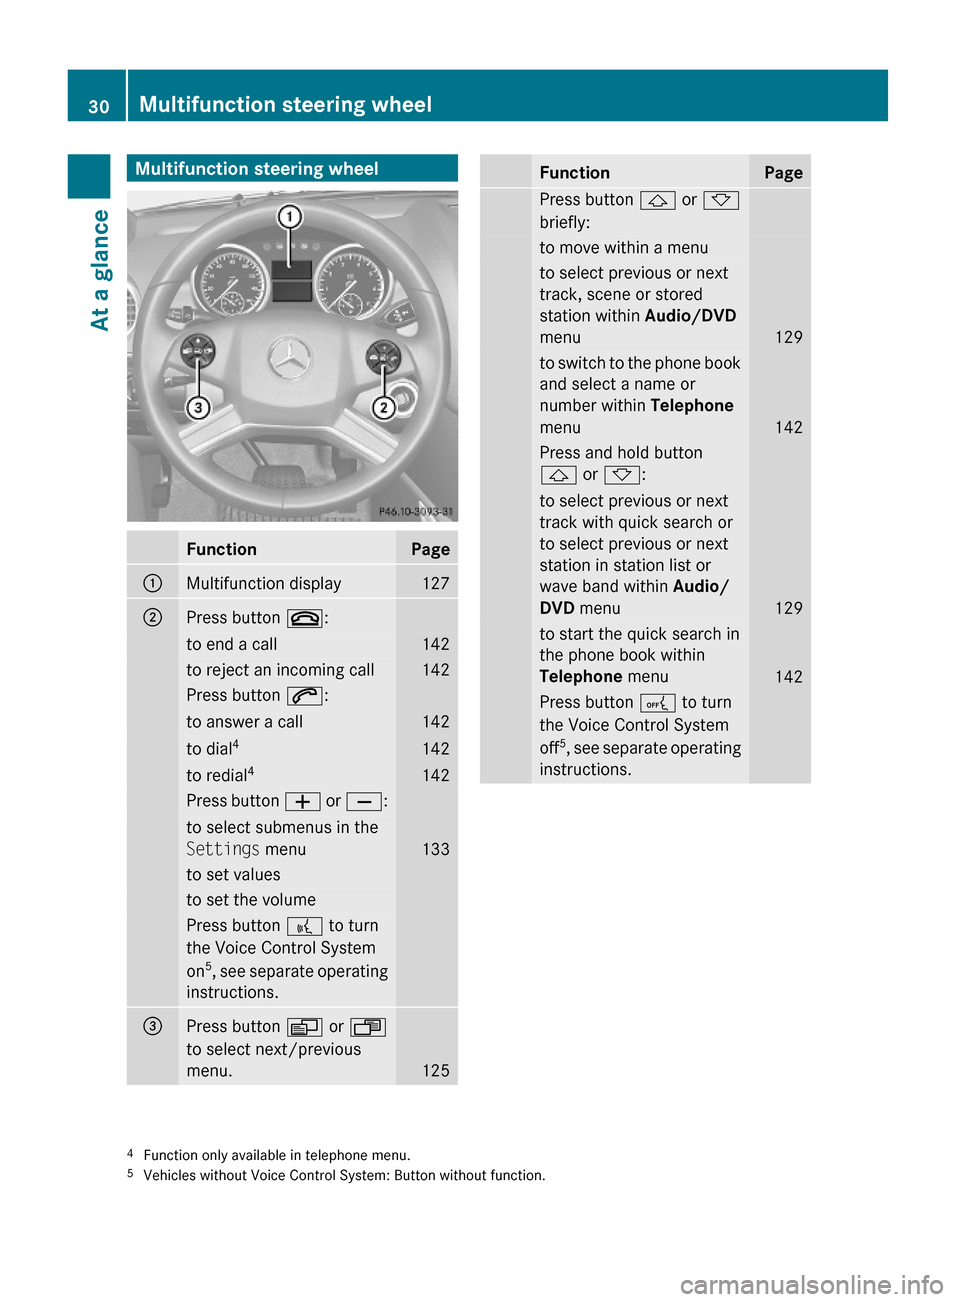 MERCEDES-BENZ GL550 2010 X164 Owners Guide Multifunction steering wheelFunctionPage:Multifunction display127;Press button ~:to end a call142to reject an incoming call142Press button 6:to answer a call142to dial4142to redial4142Press button W o